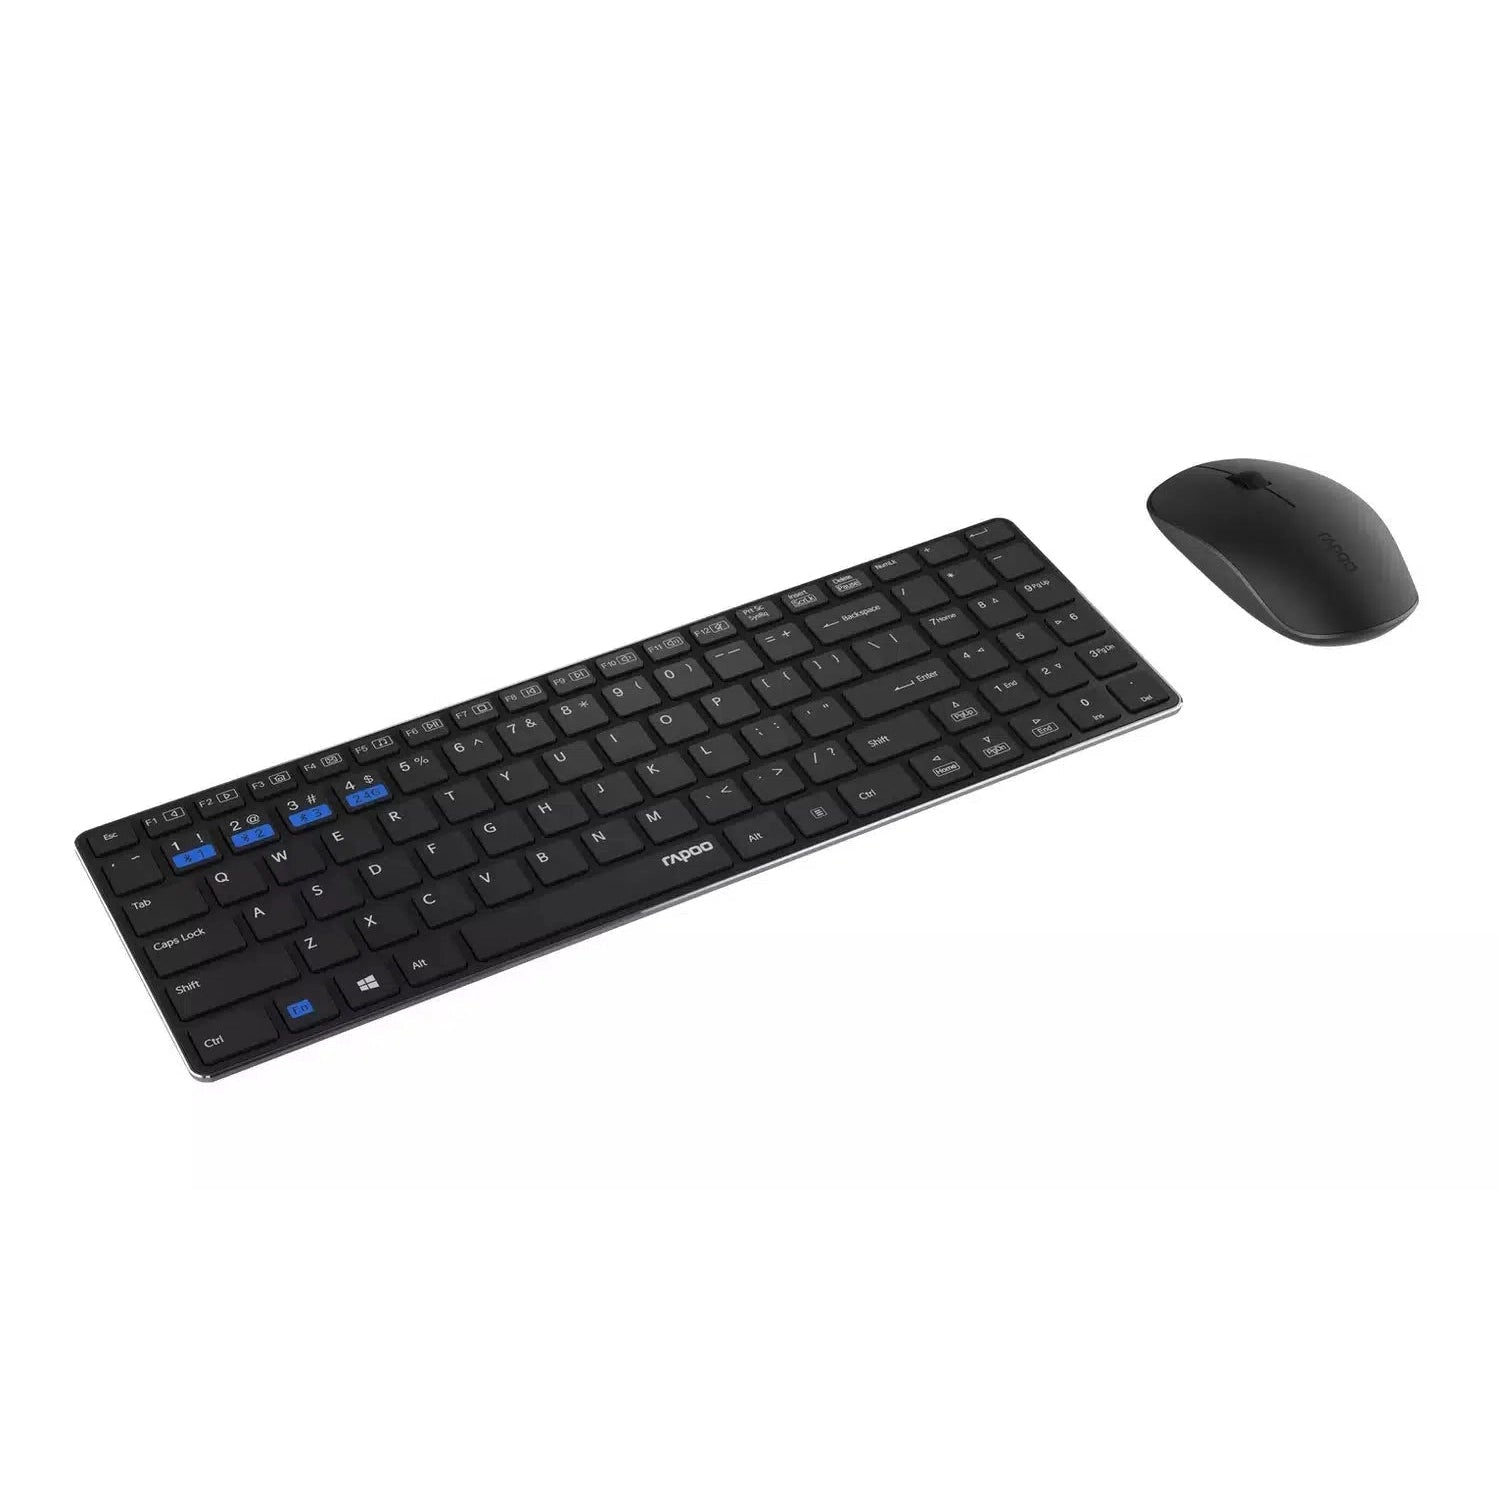 Rapoo 9300M Wireless Keyboard Only, Black - Refurbished Excellent